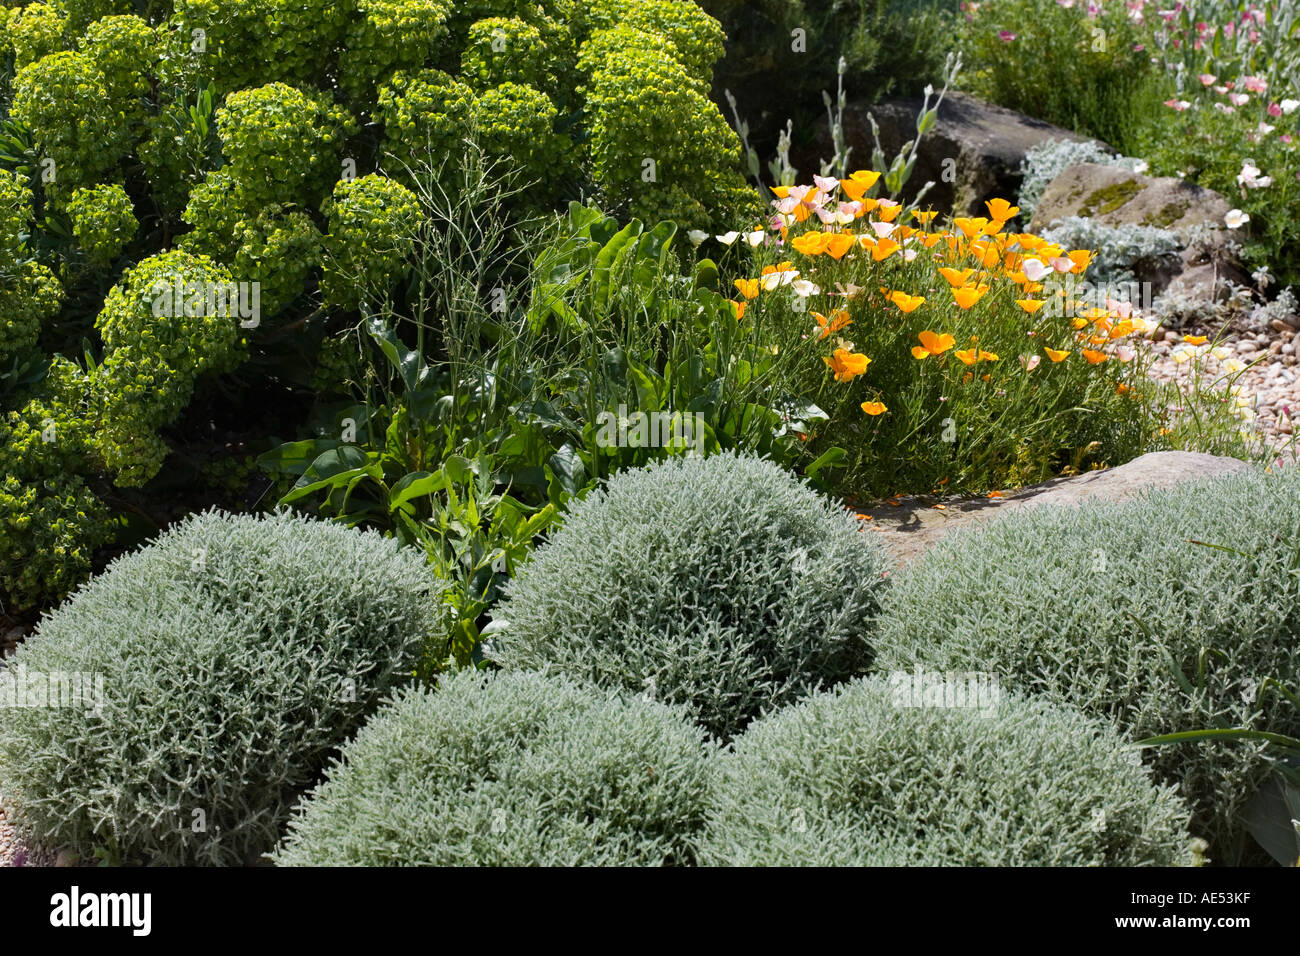 THE DRY GARDEN AT RHS GARDEN HYDE HALL IN JUNE WITH CALIFORNIAN POPPIES EUPHORBIA AND SANTOLINA Stock Photo